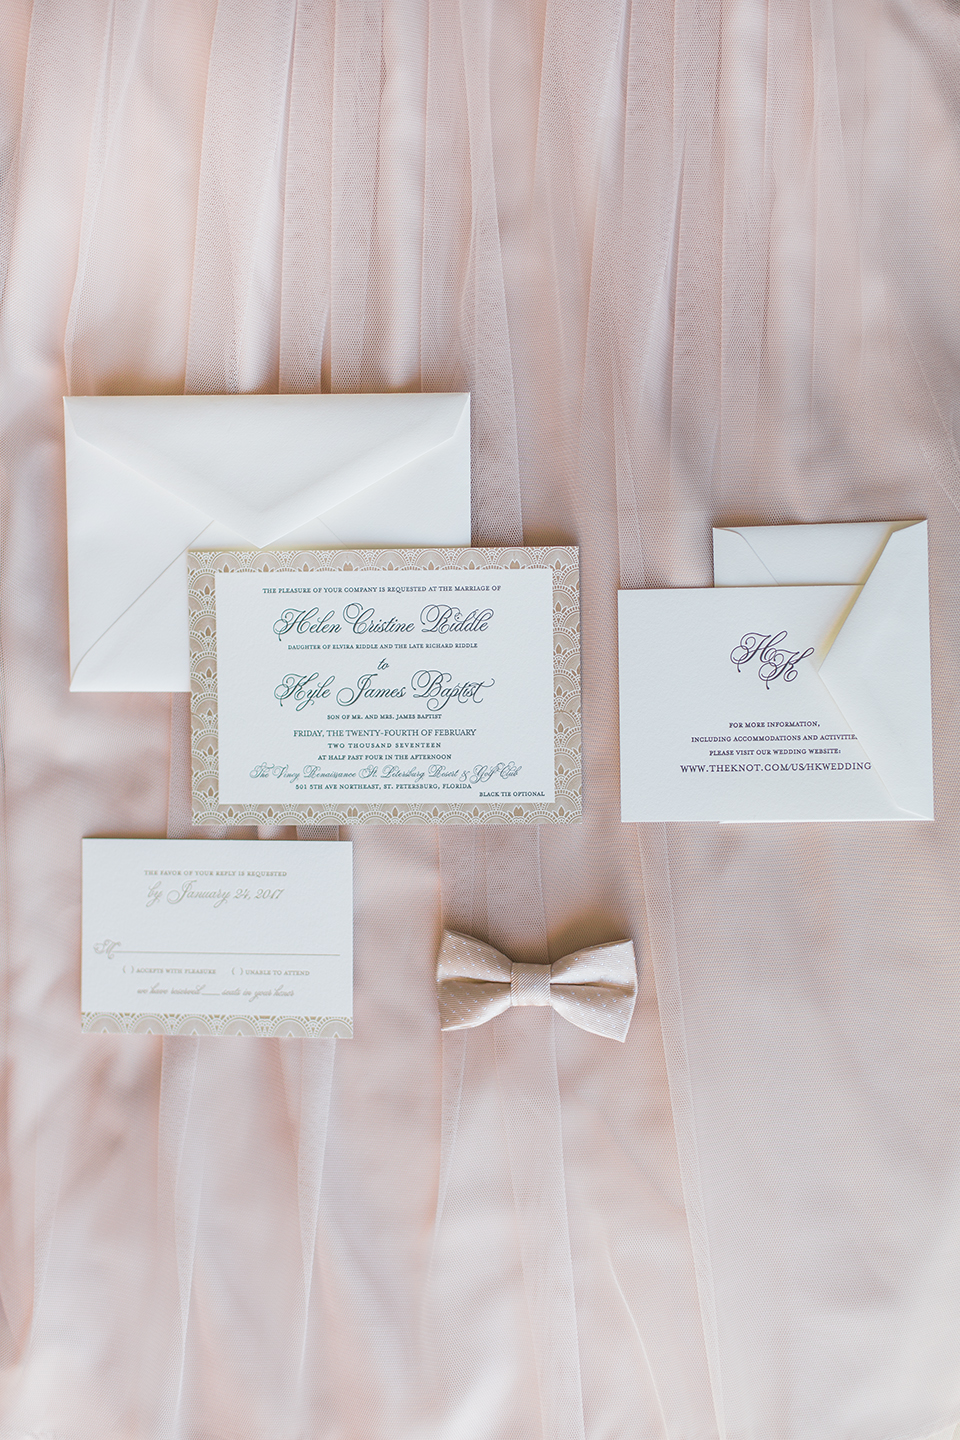 Stationary Suite image at The Vinoy in St. Pete, Florida on a wedding day | Debra Eby Photography Co.